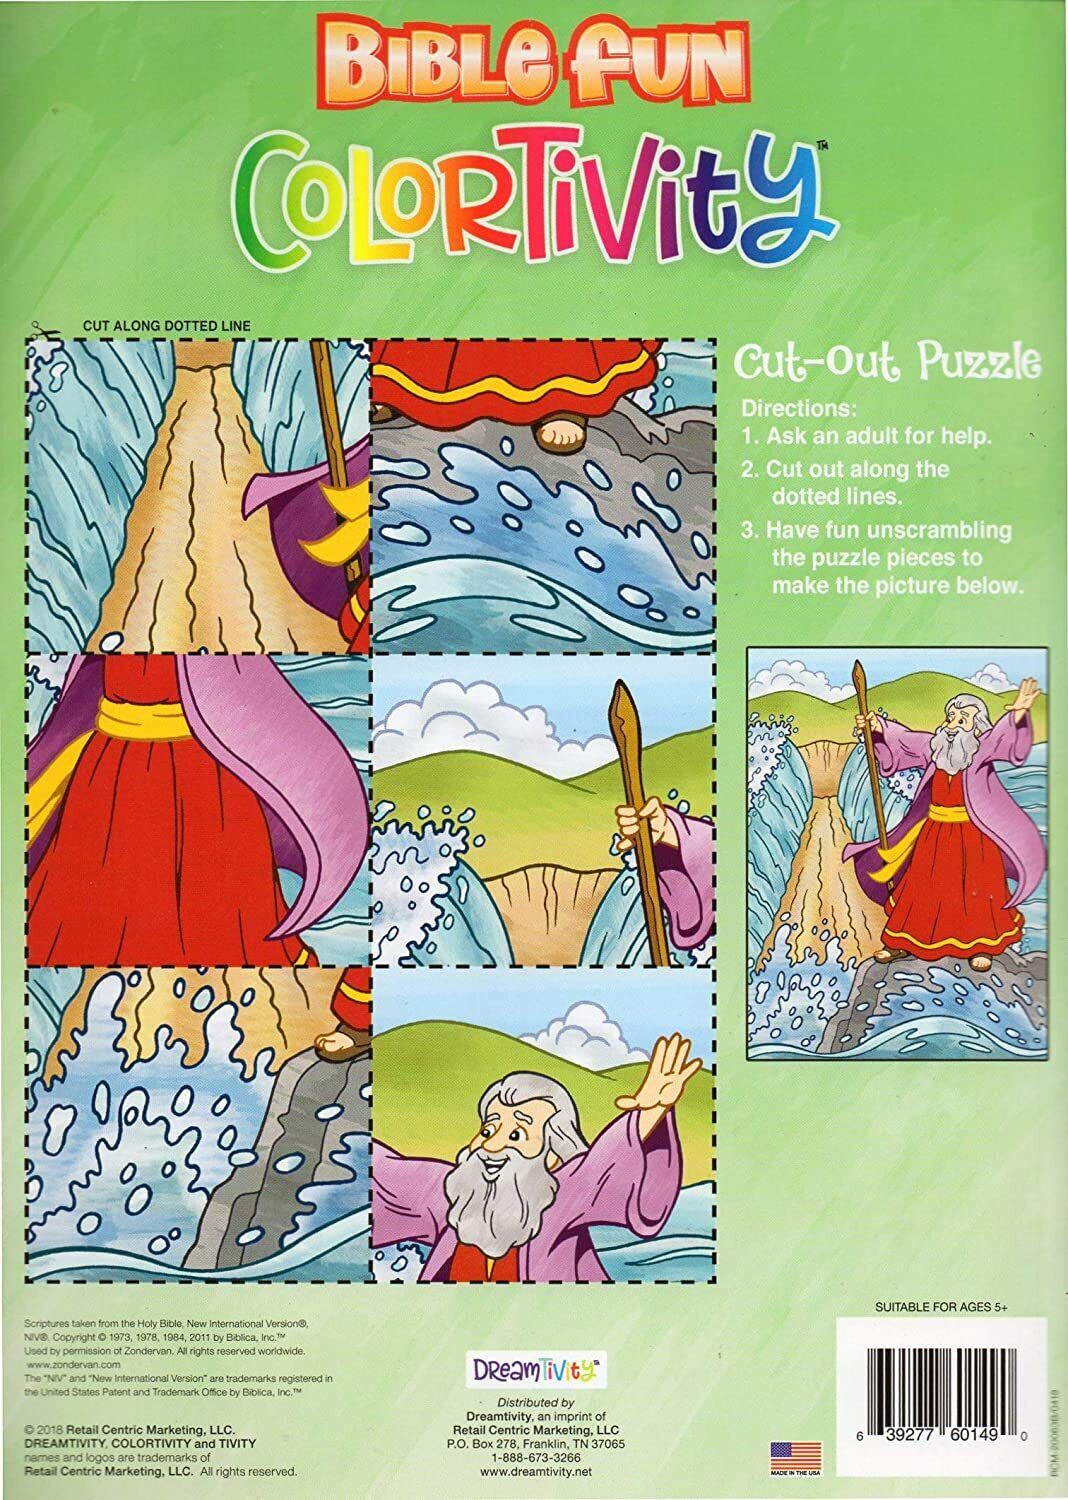 Colortivity Bible Fun - Read and Color Coloring & Activity Book